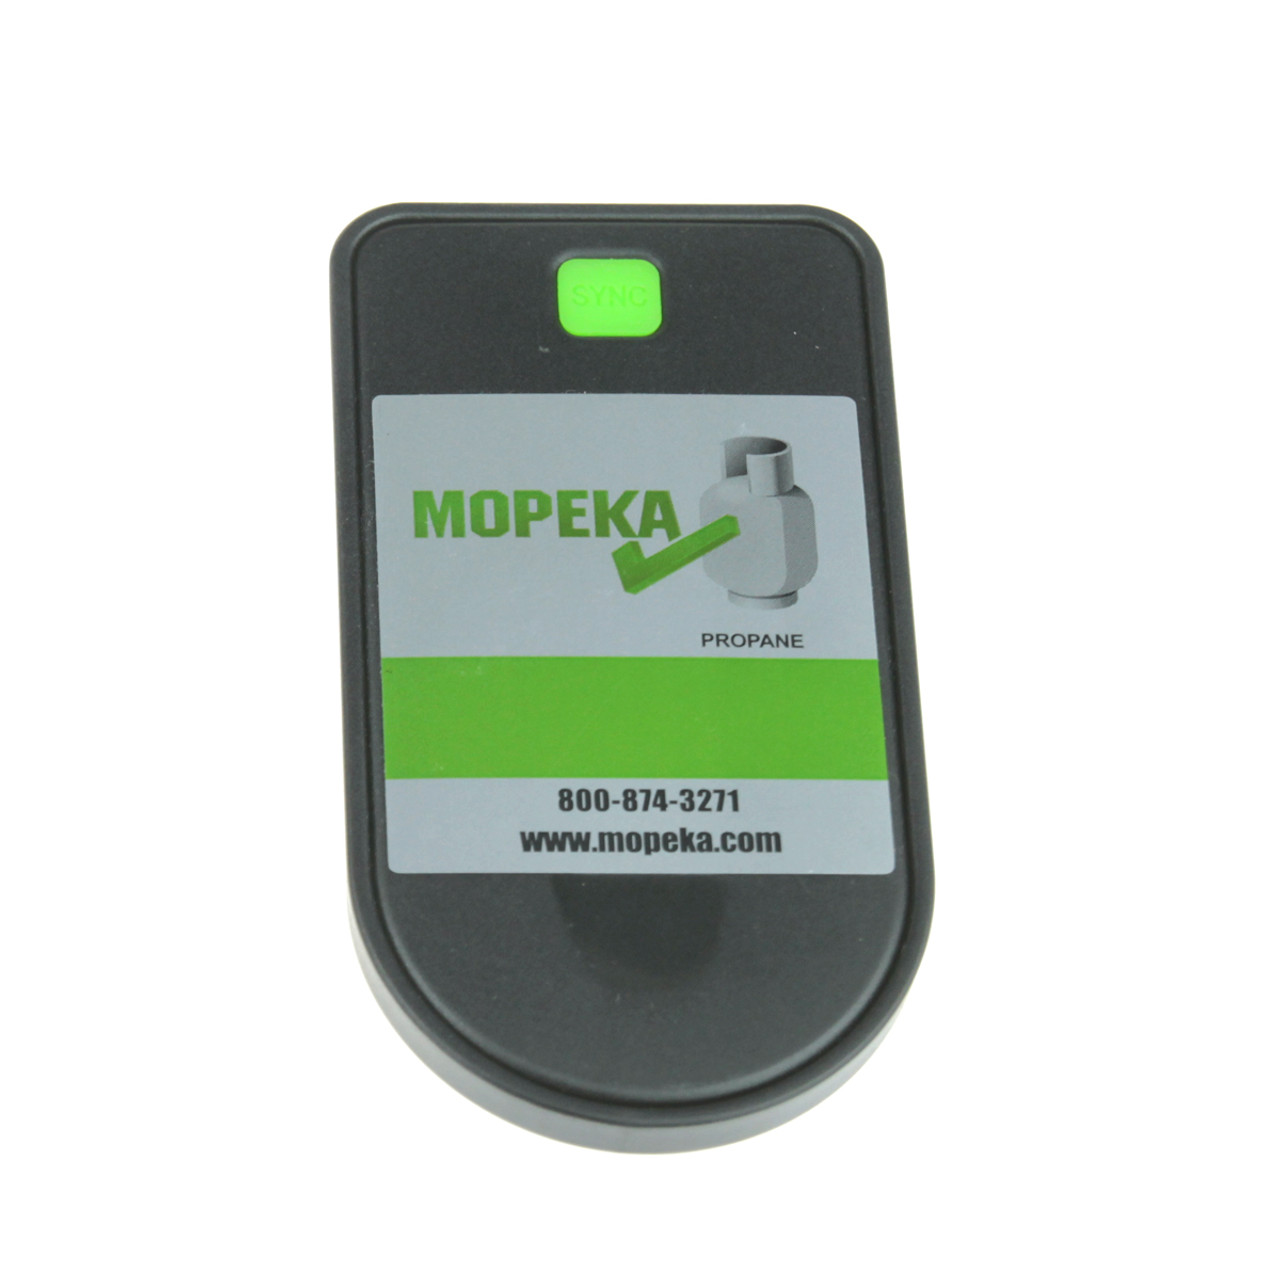 https://cdn11.bigcommerce.com/s-0baae/images/stencil/1280x1280/products/3114/9975/mopeka_tank_check_bluetooth_remote_level_sender__84710.1551963834.jpg?c=2?imbypass=on